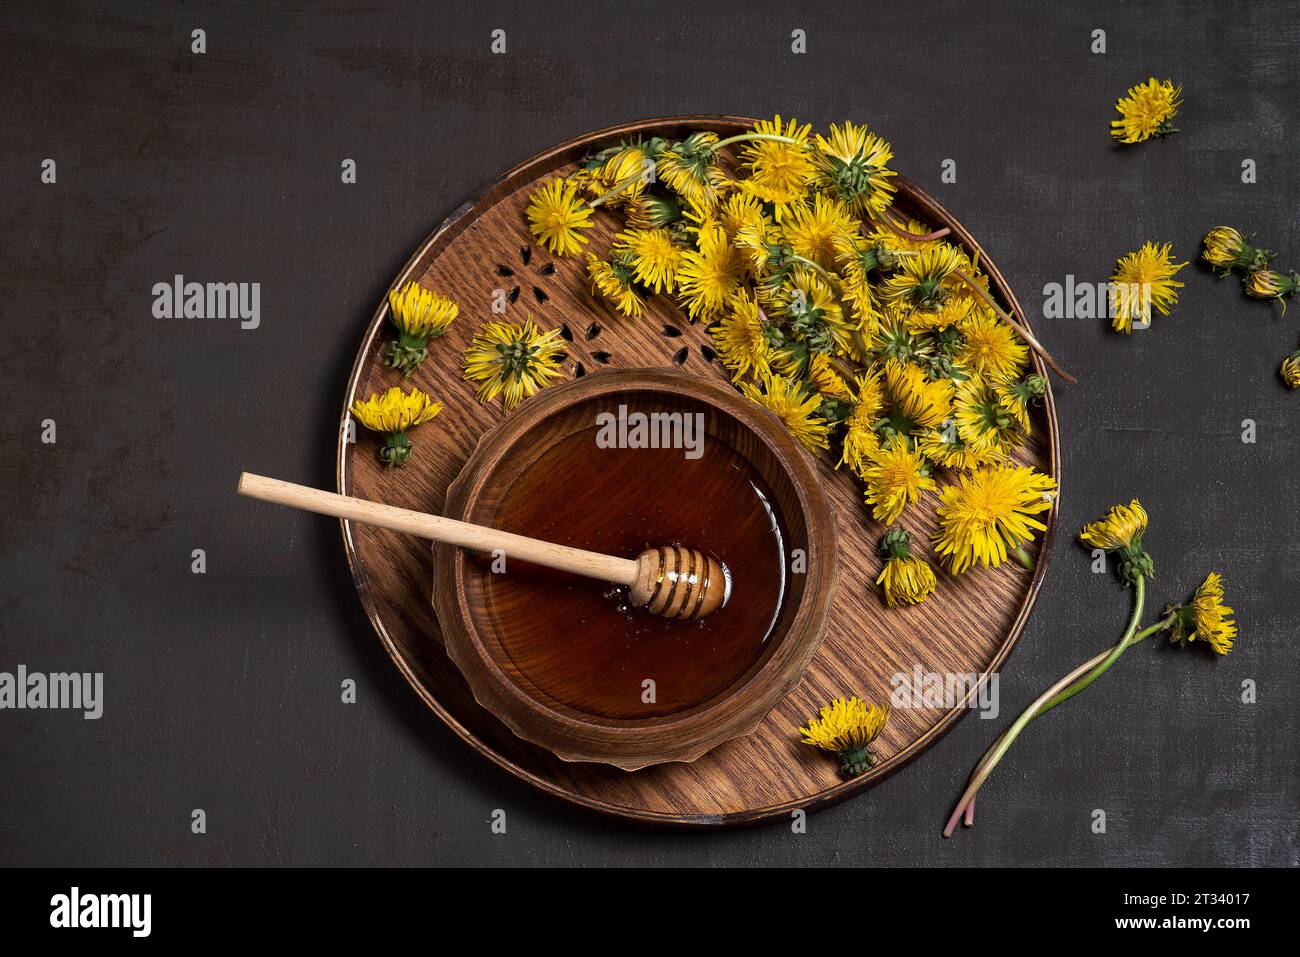 Dandelion honey with dandelion leaves and flowers in a wooden bowl on a black background. Top view Stock Photo